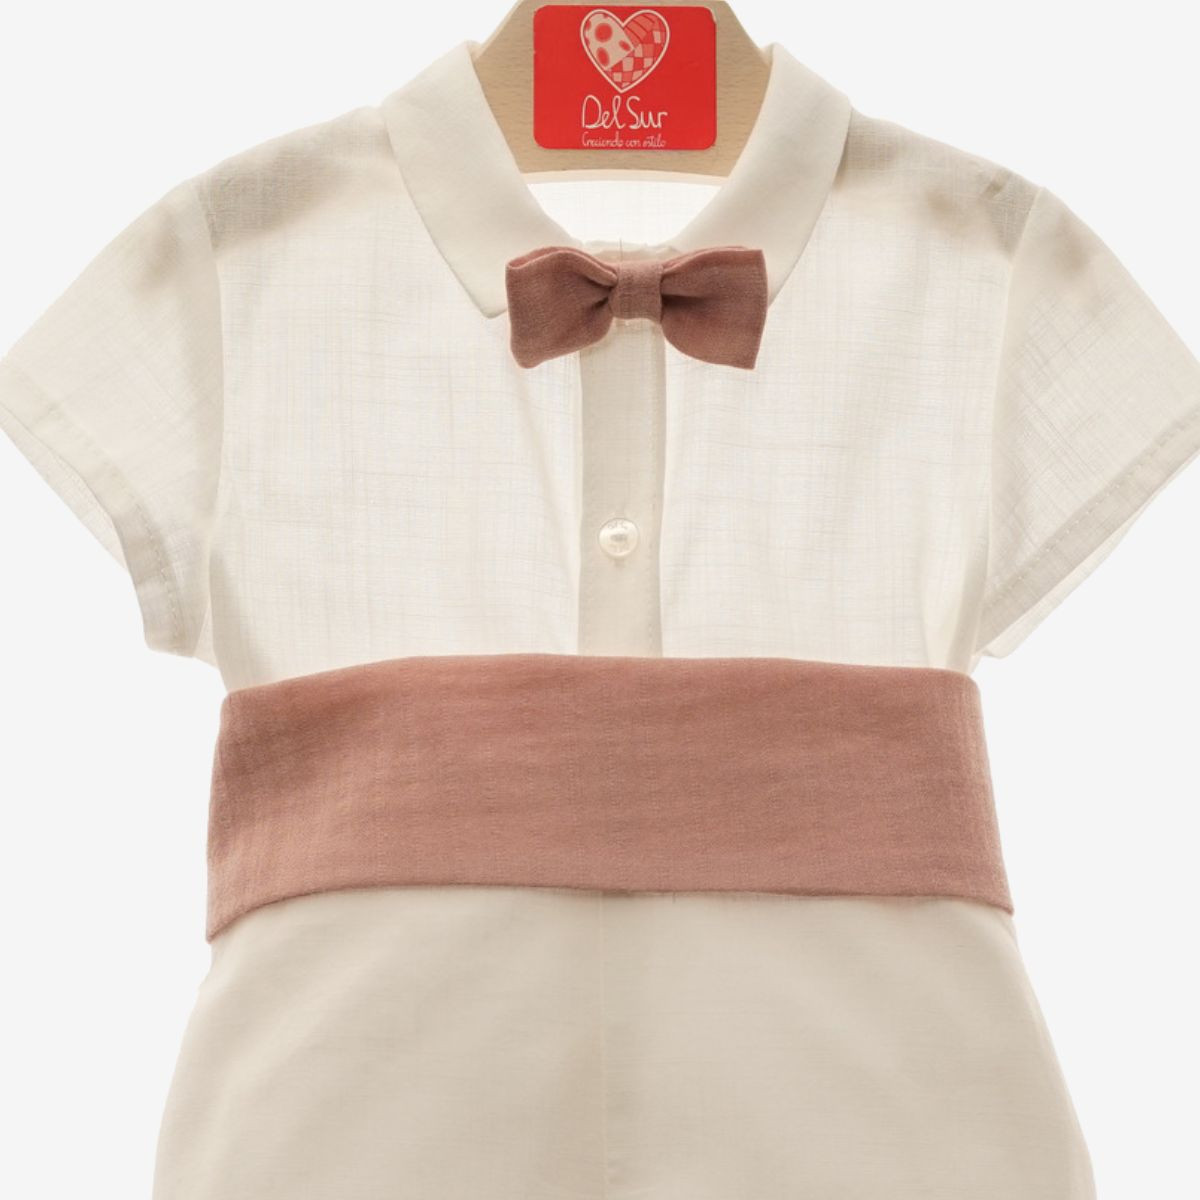 POLO WITH BOW TIE AND PANTS WAISTBAND DELSUR - 1